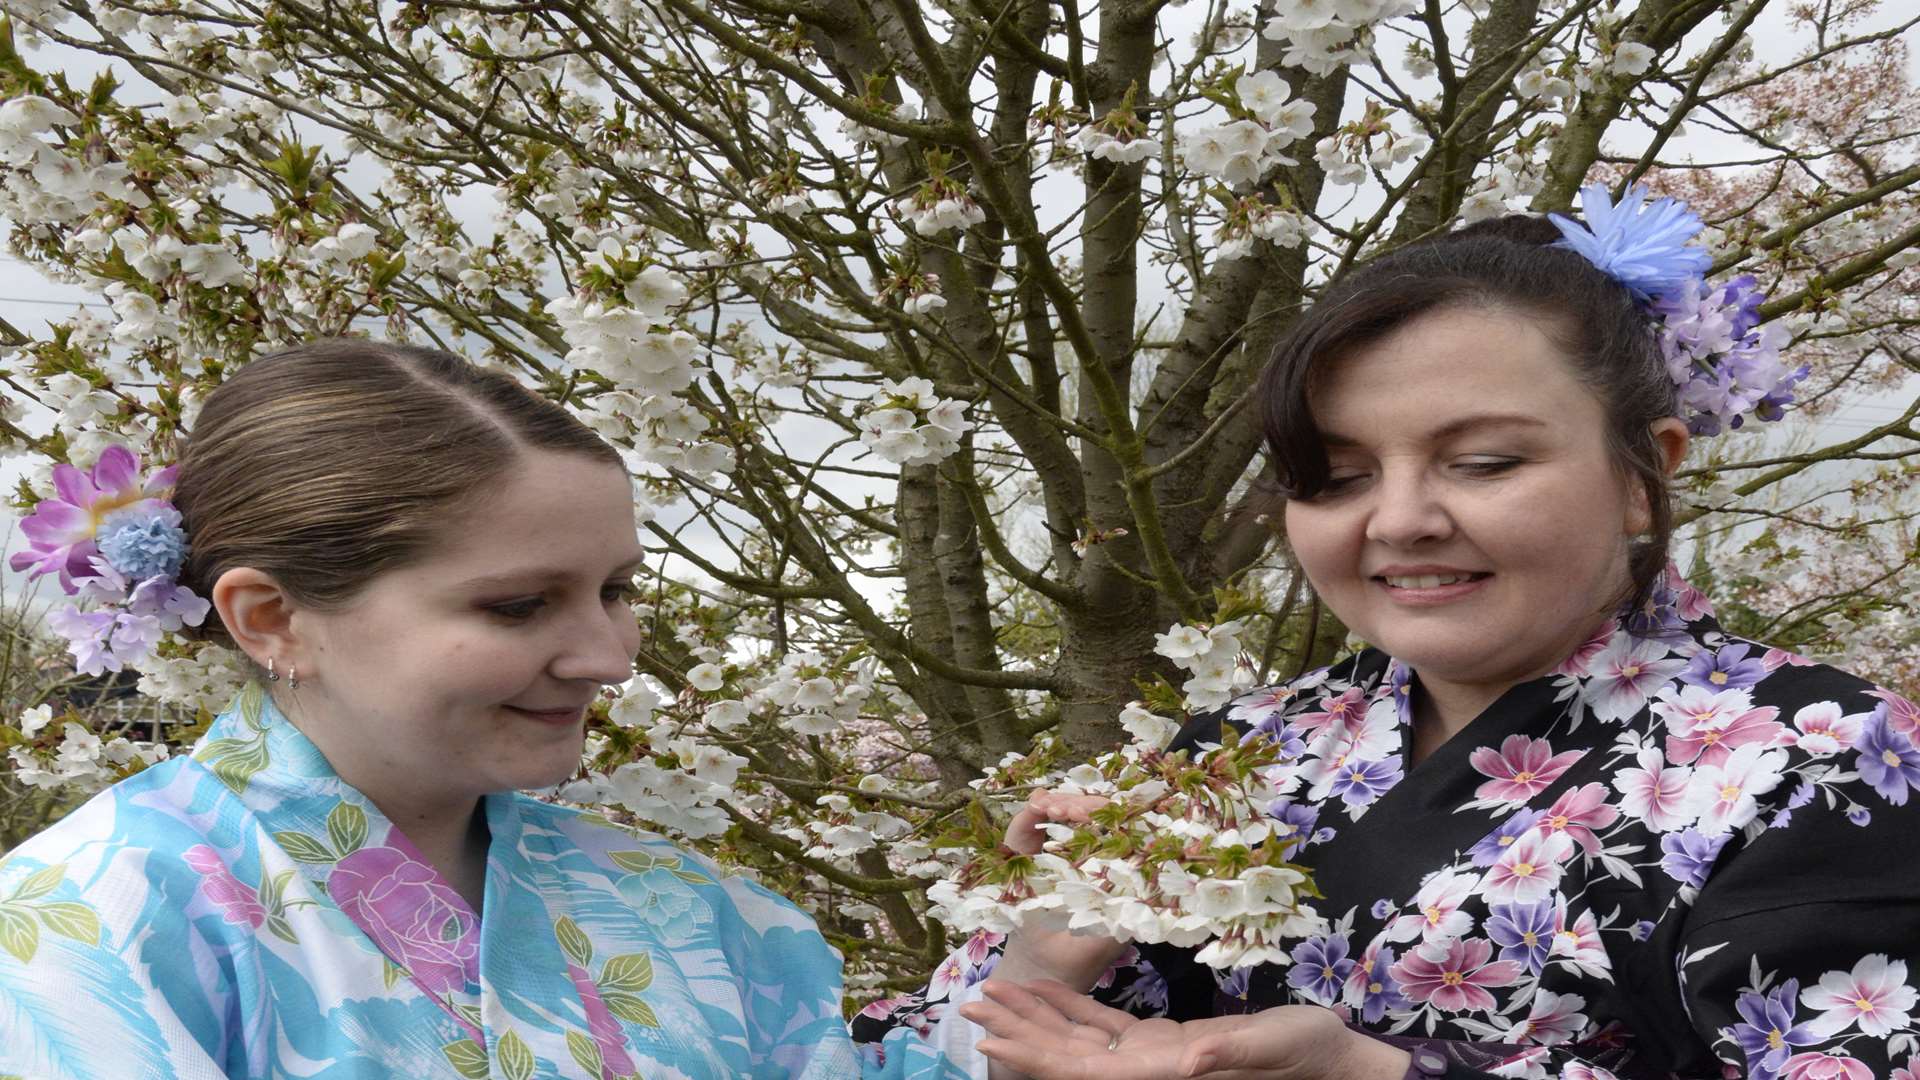 Emma Devaney and Anna Cormacey in the cherry orchard at last year's Hanami blossom festival